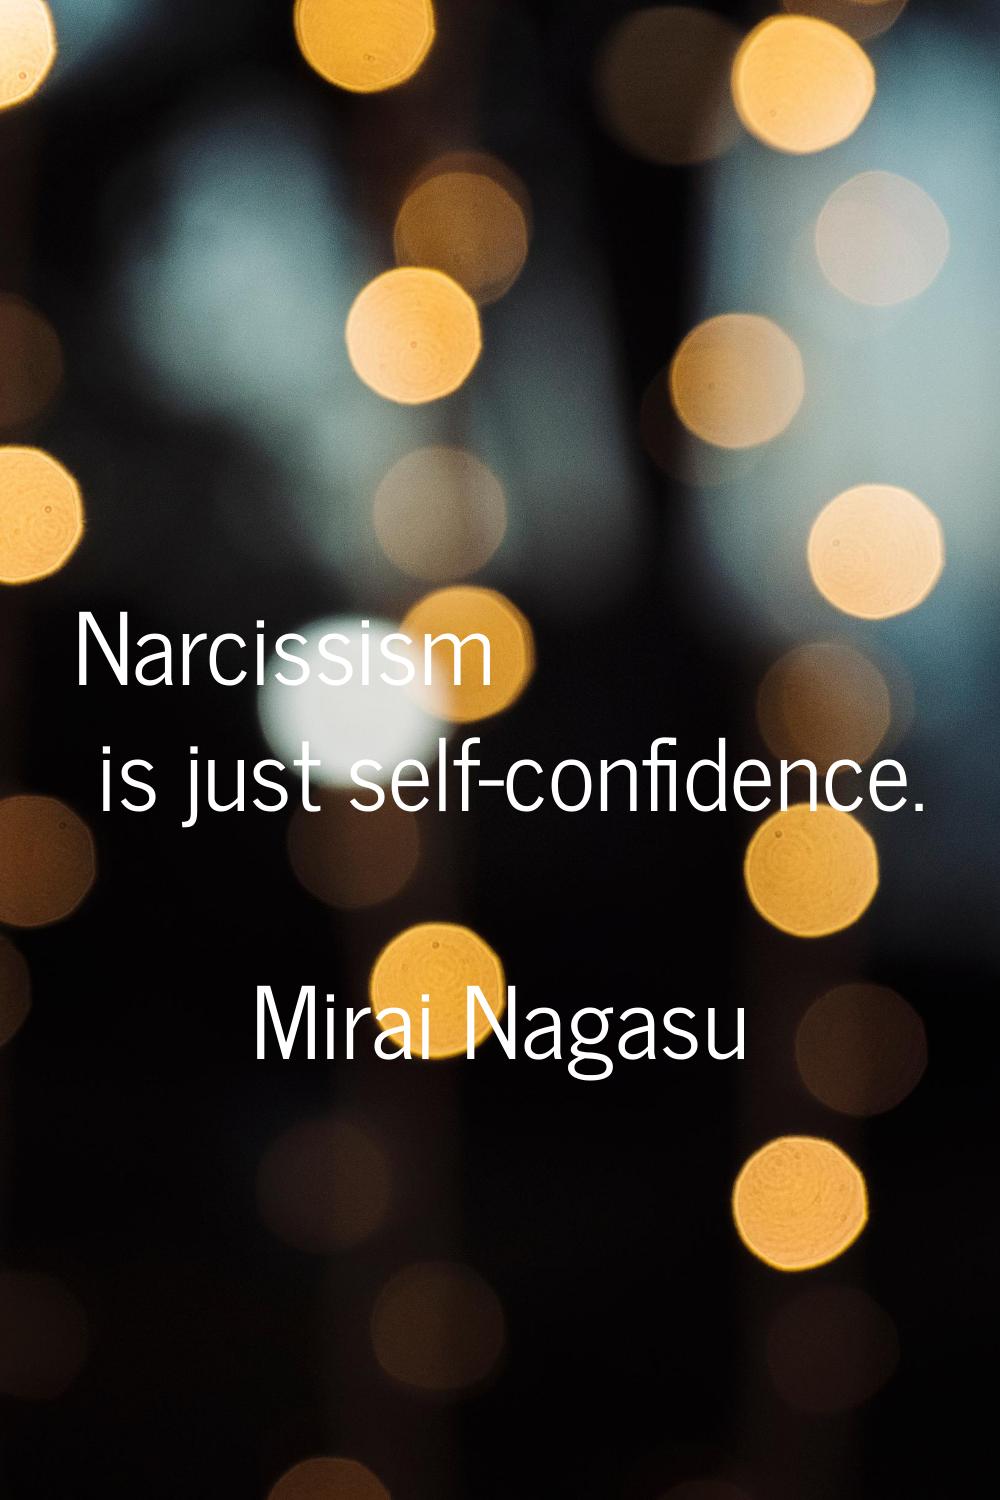 Narcissism is just self-confidence.